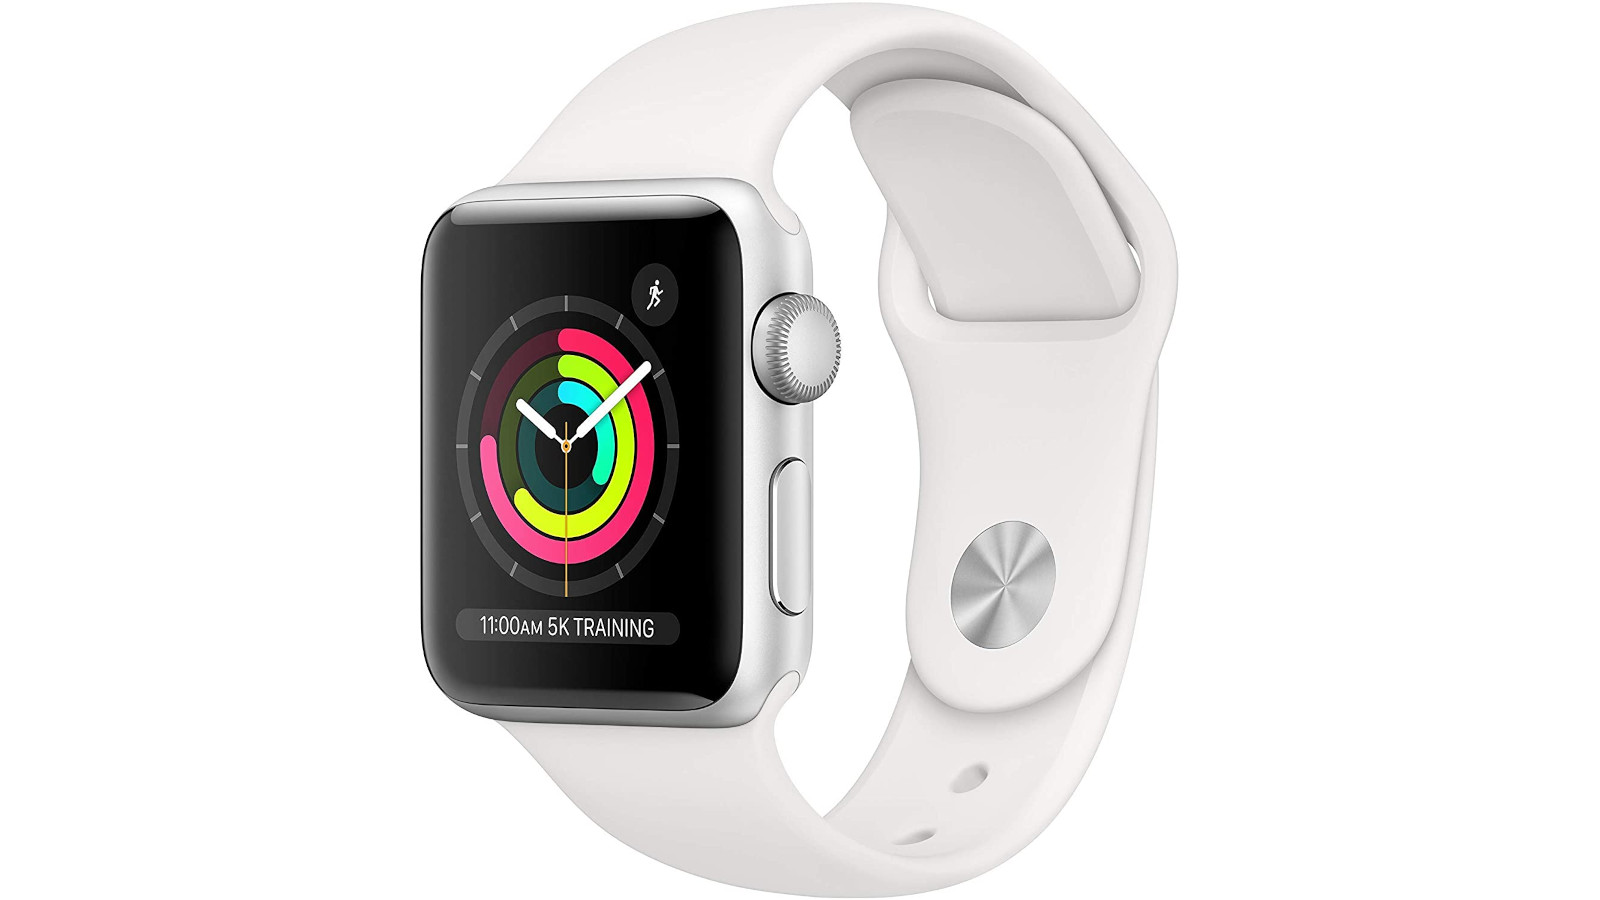 Apple Watch Series 3 with white band